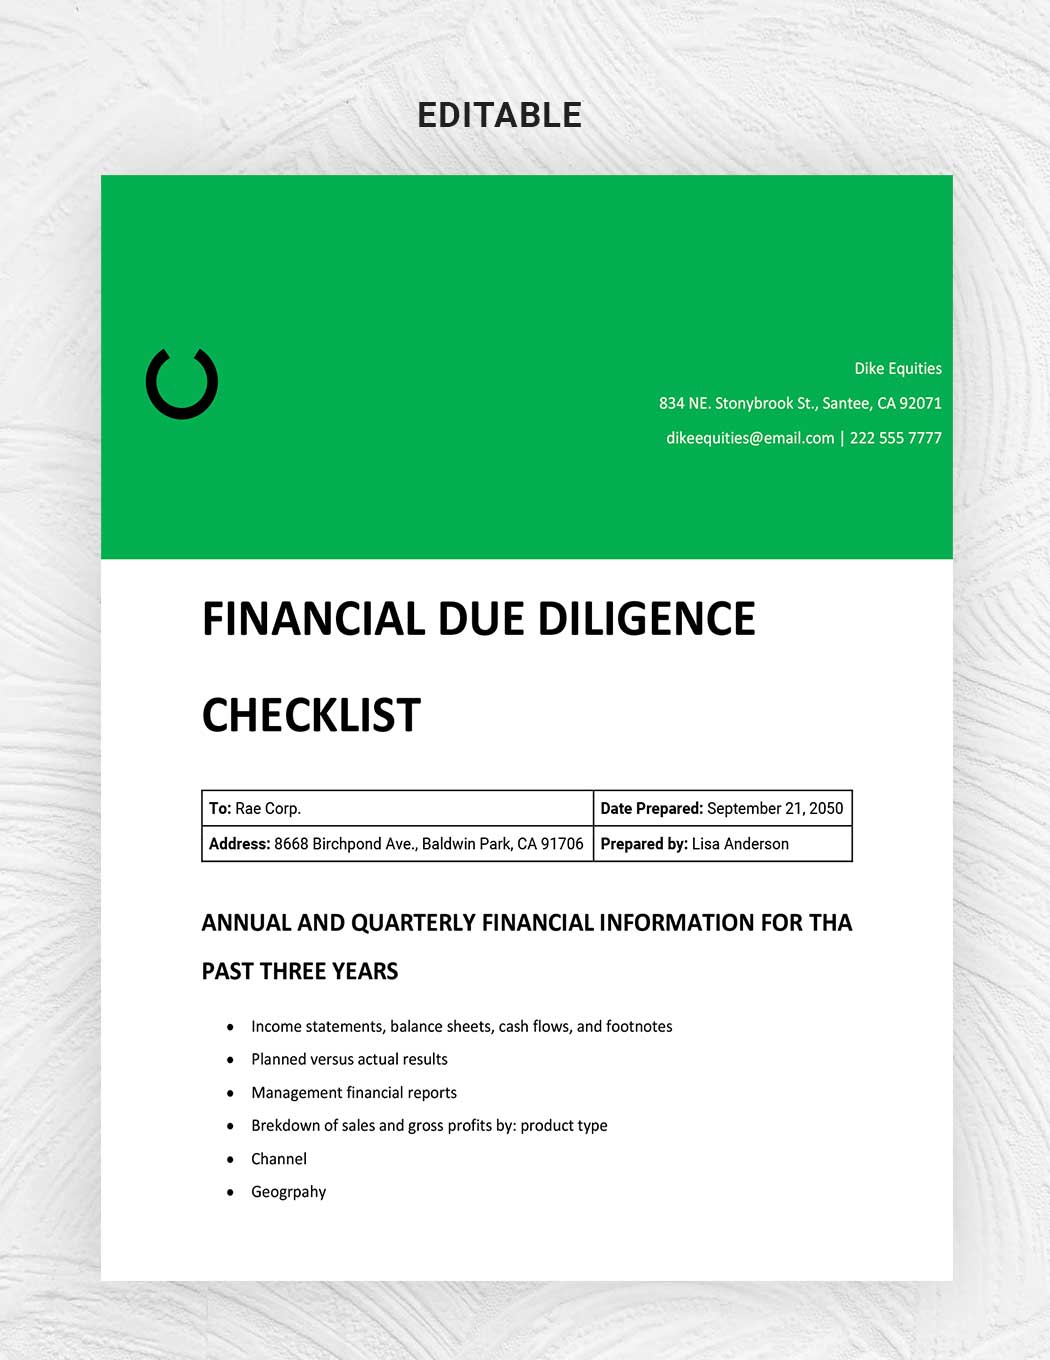 Financial Due Diligence Checklist Download in Word, Google Docs